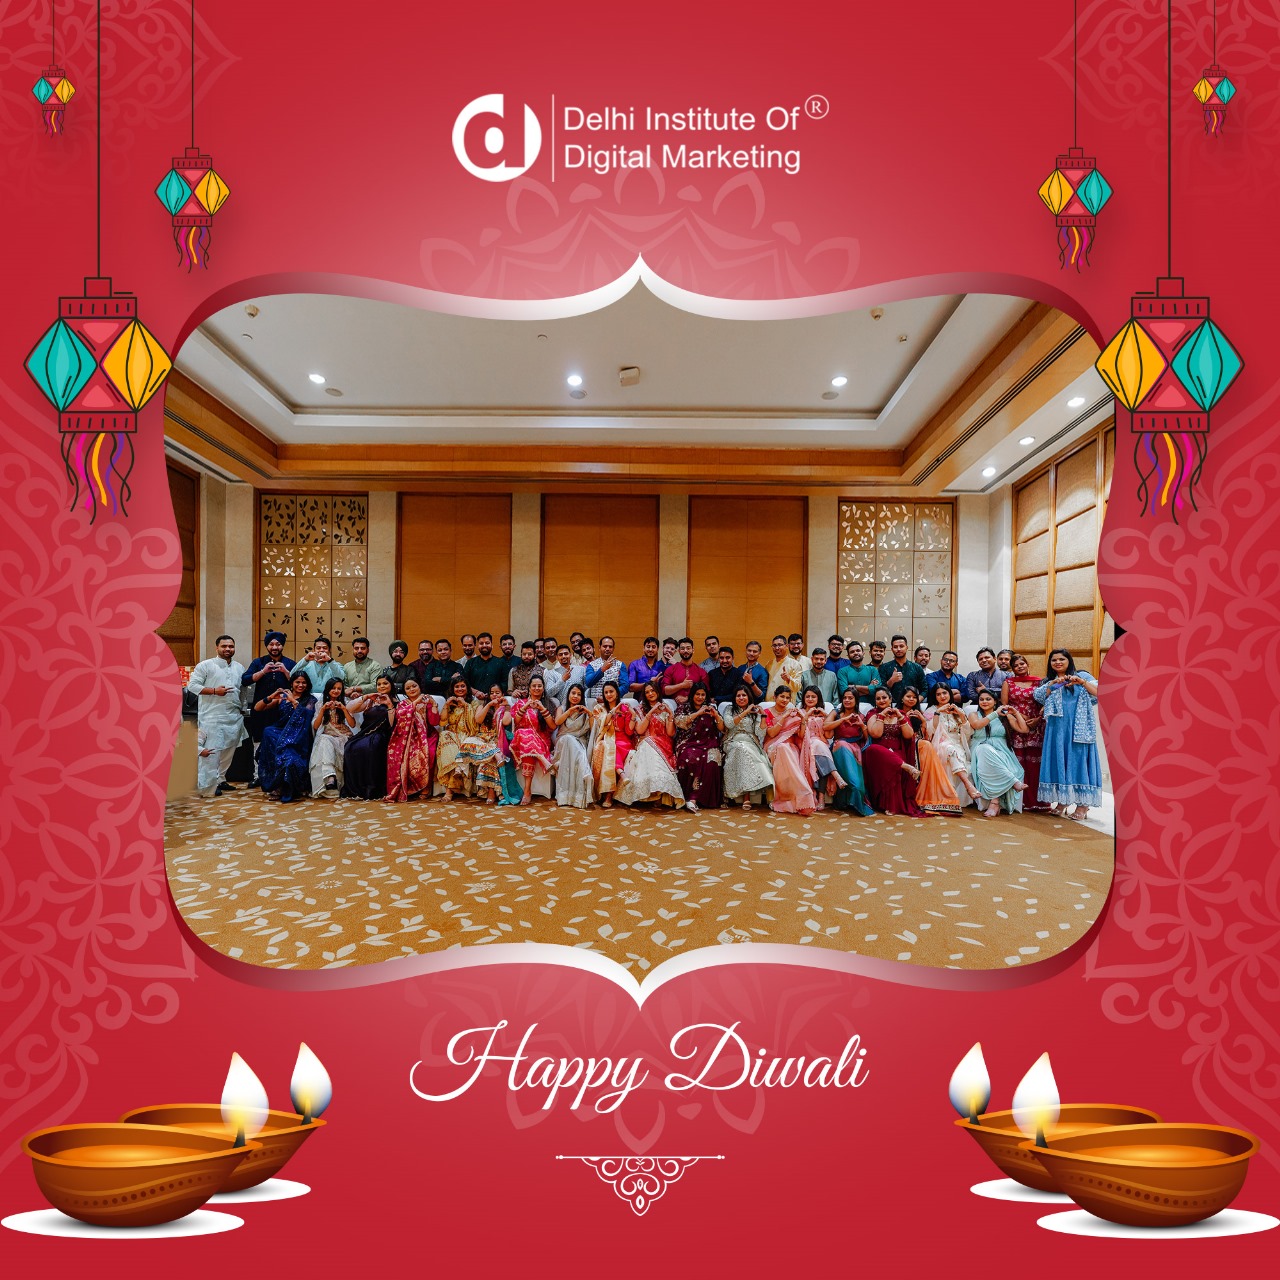 Happy Diwali from the DIDM Family